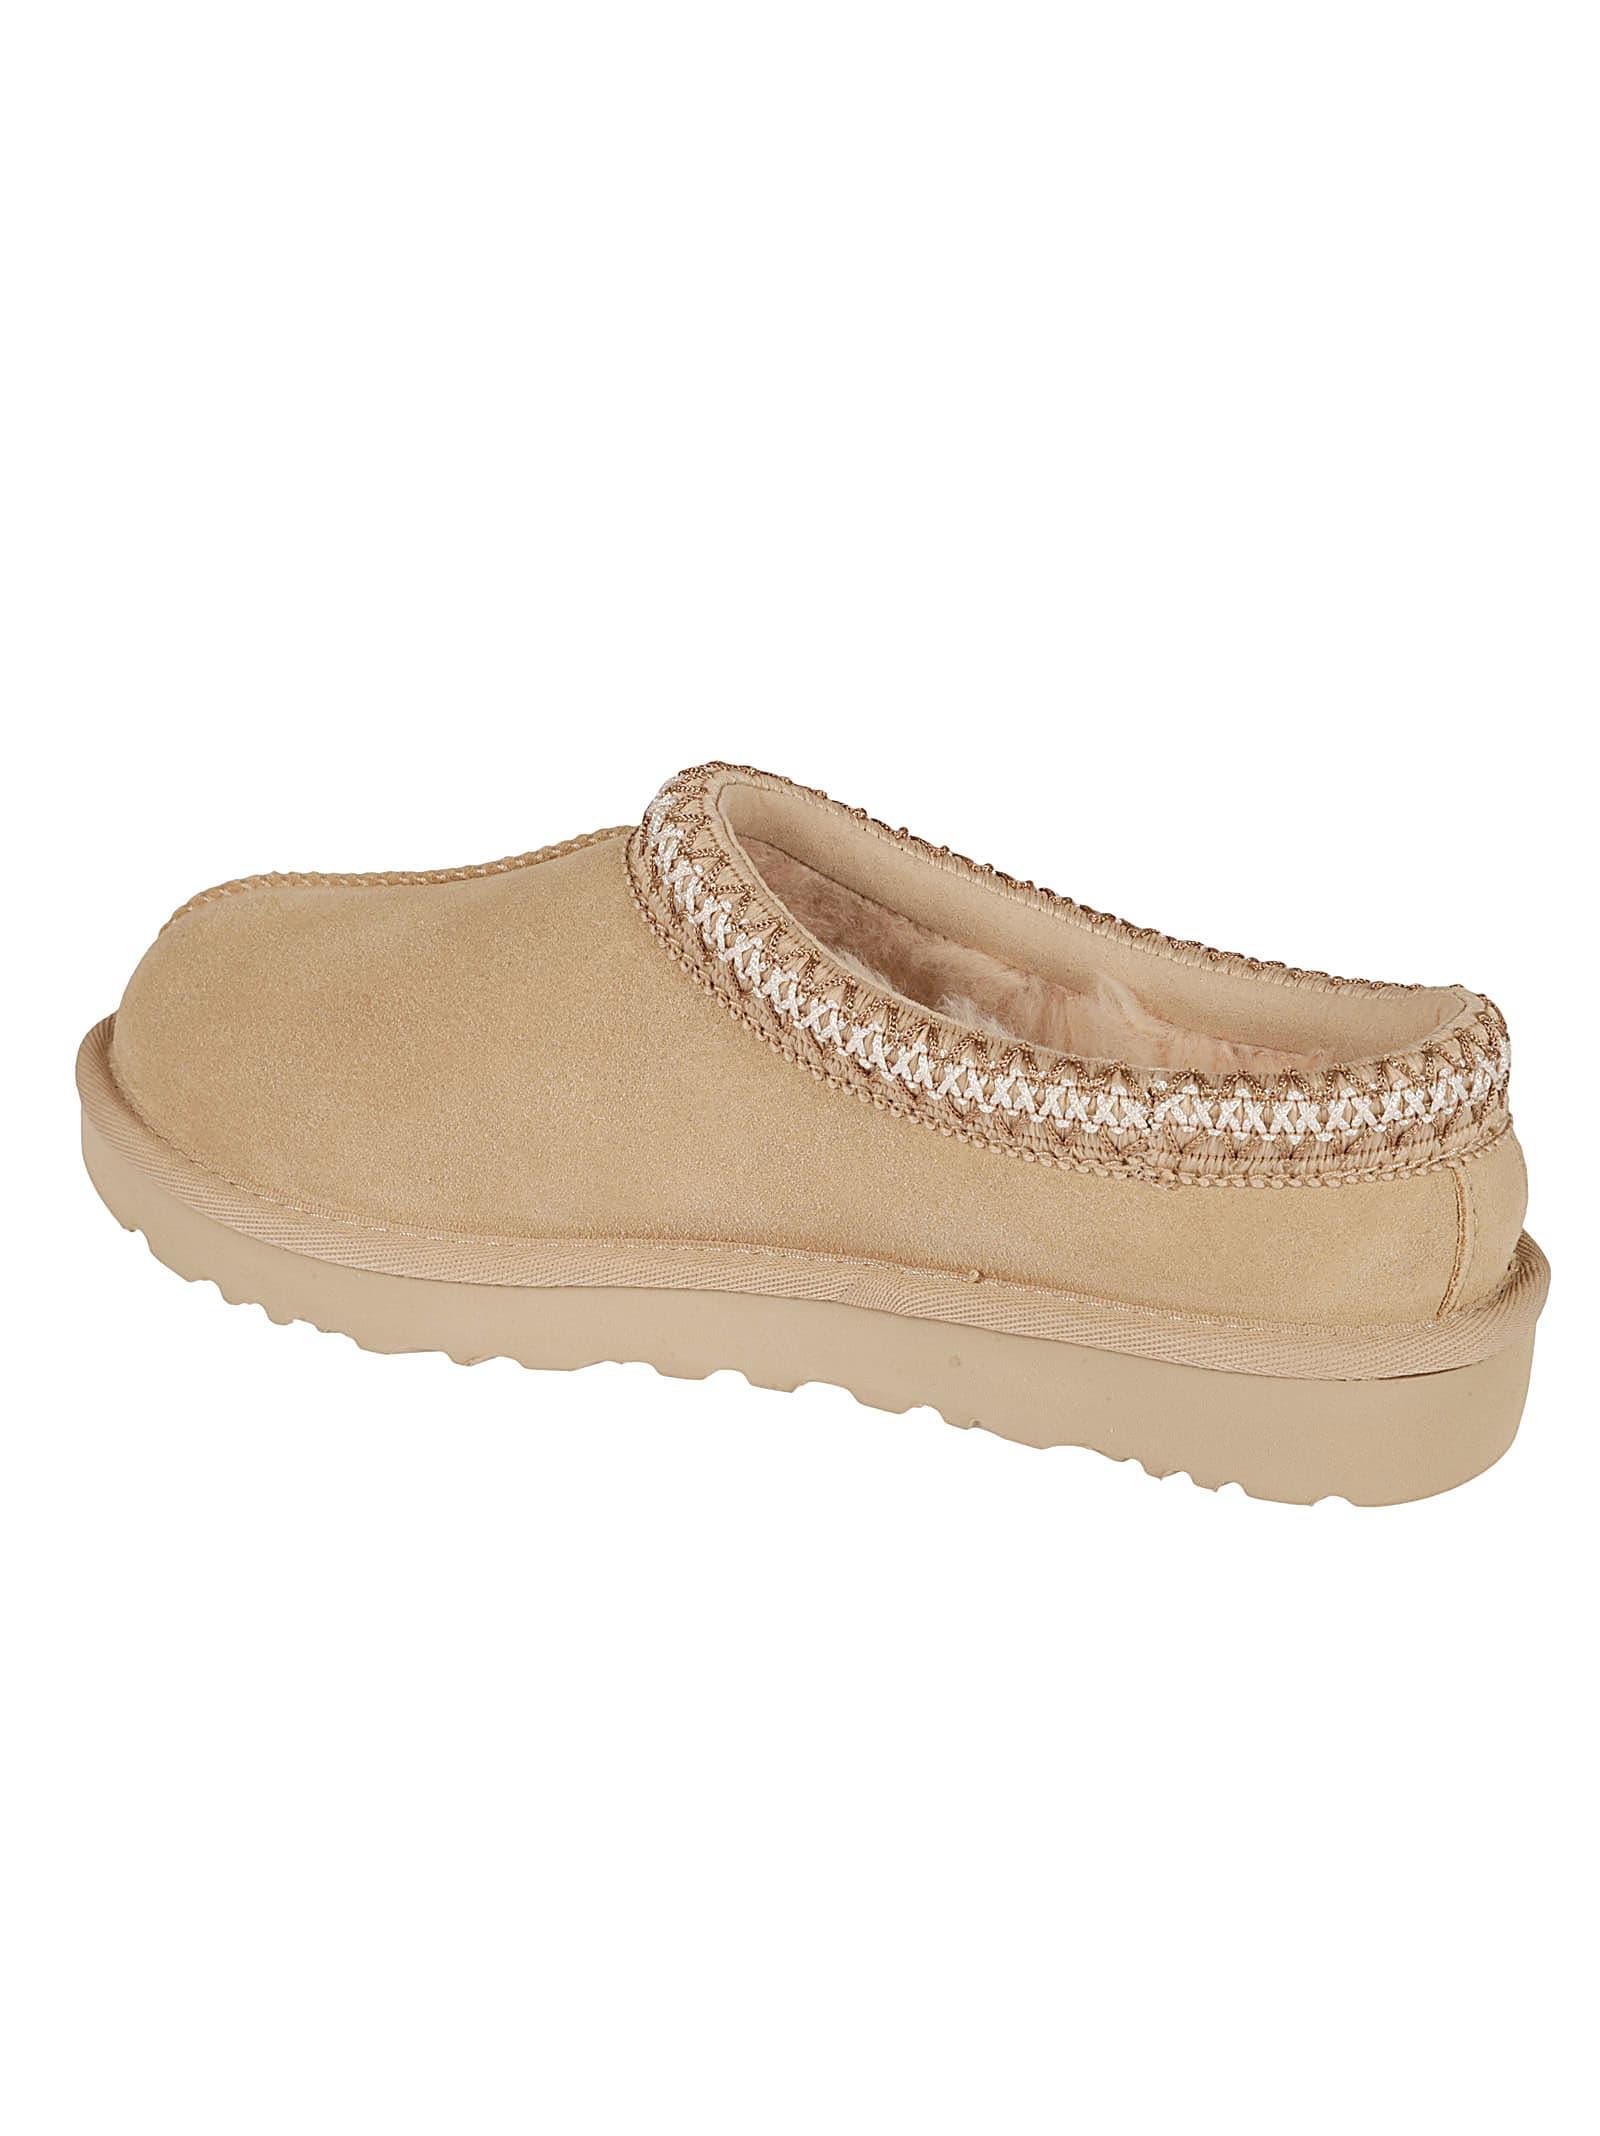 UGG Tasman Low Boots in Natural | Lyst